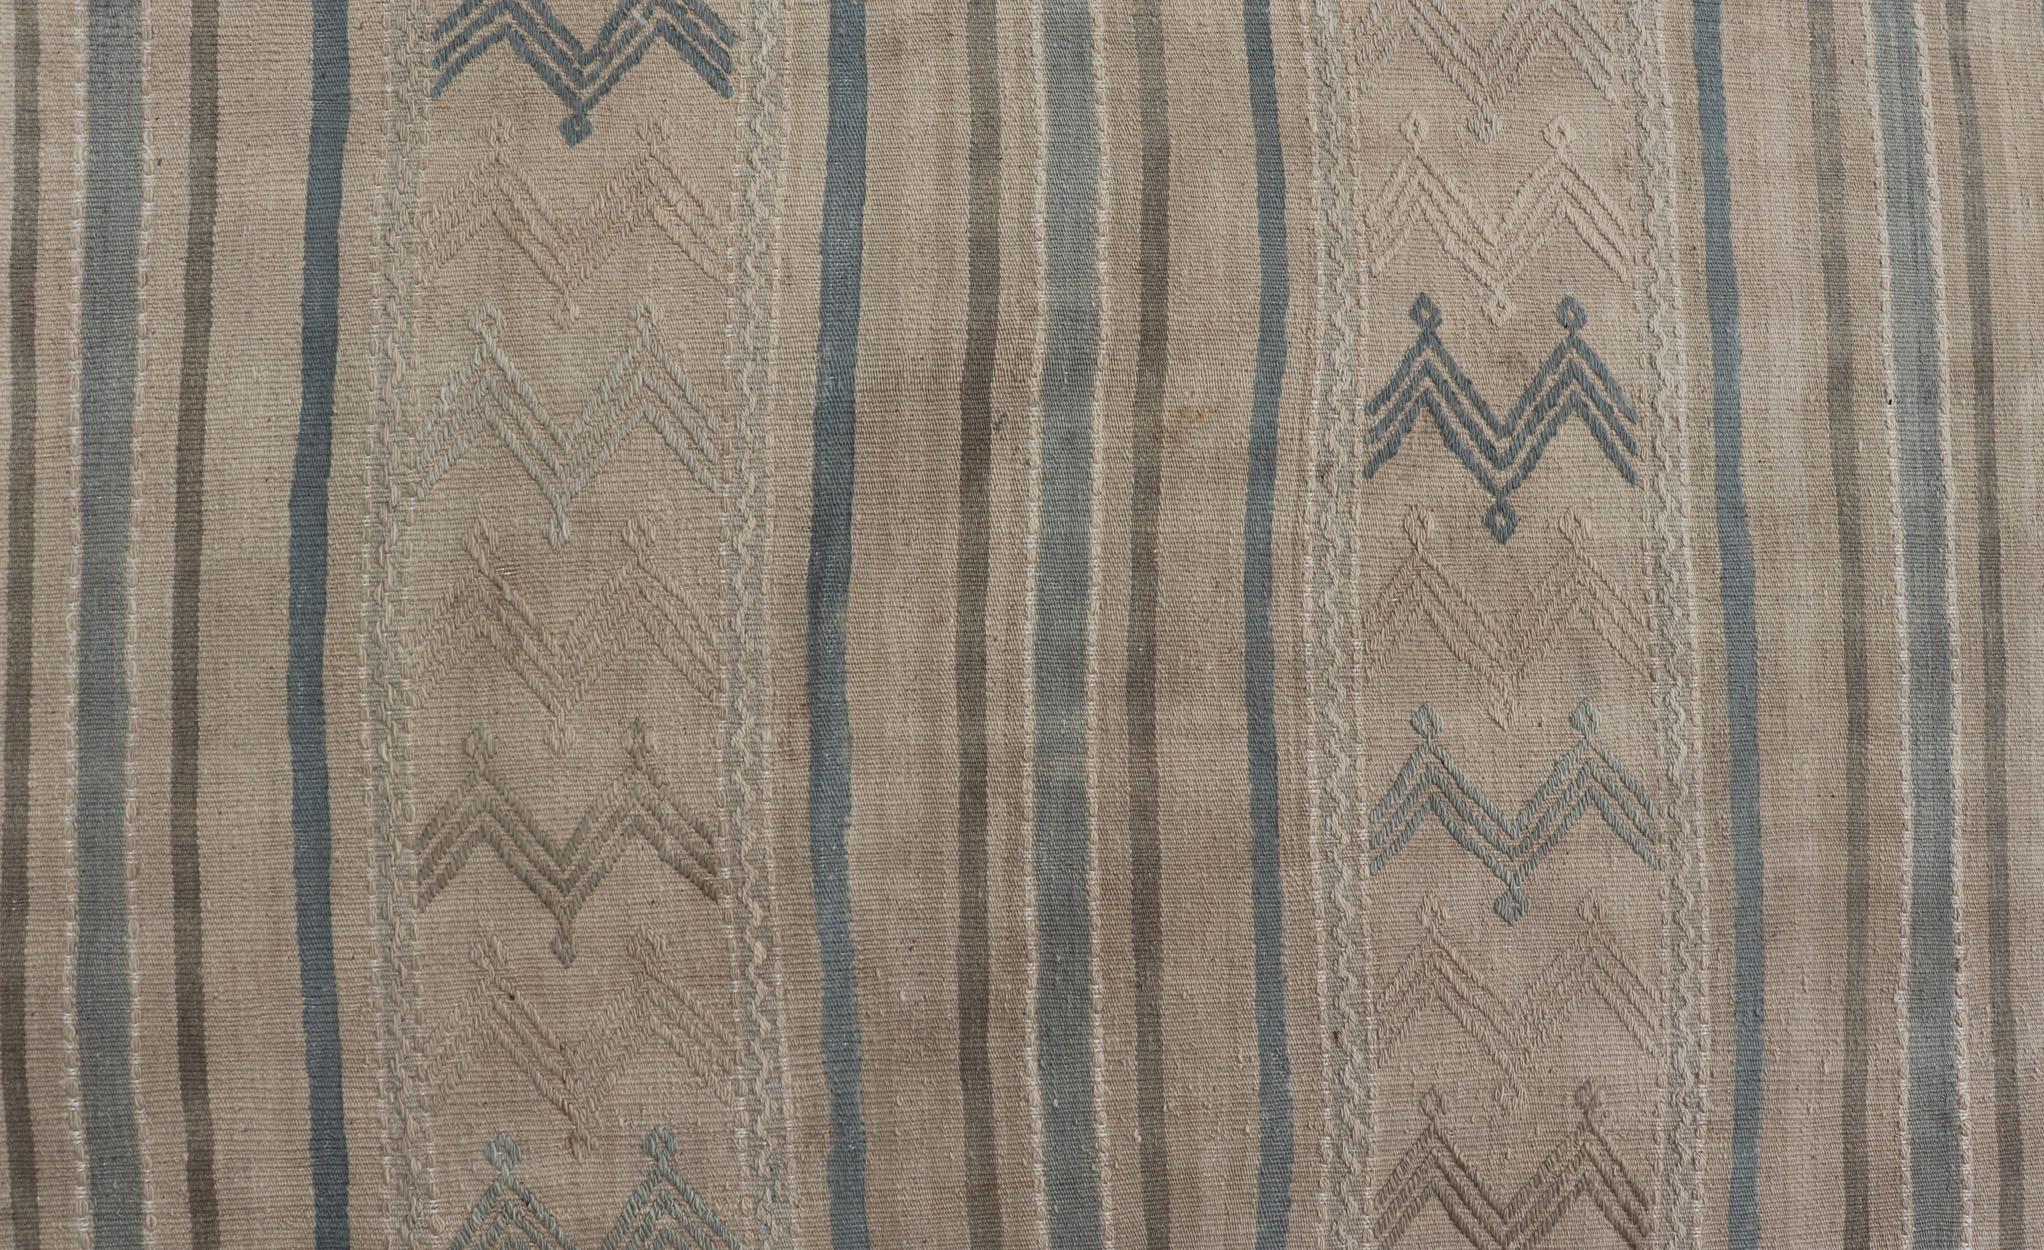 Turkish Vintage Kilim with embroidered motifs with light tan, blue, and brown. Vintage Kilim, Keivan Woven Arts / rug EN-179451, country of origin / type: Turkey / Kilim, circa 1950

Measures: 5'1 x 10'1 

This flat-woven Kilim from Turkey